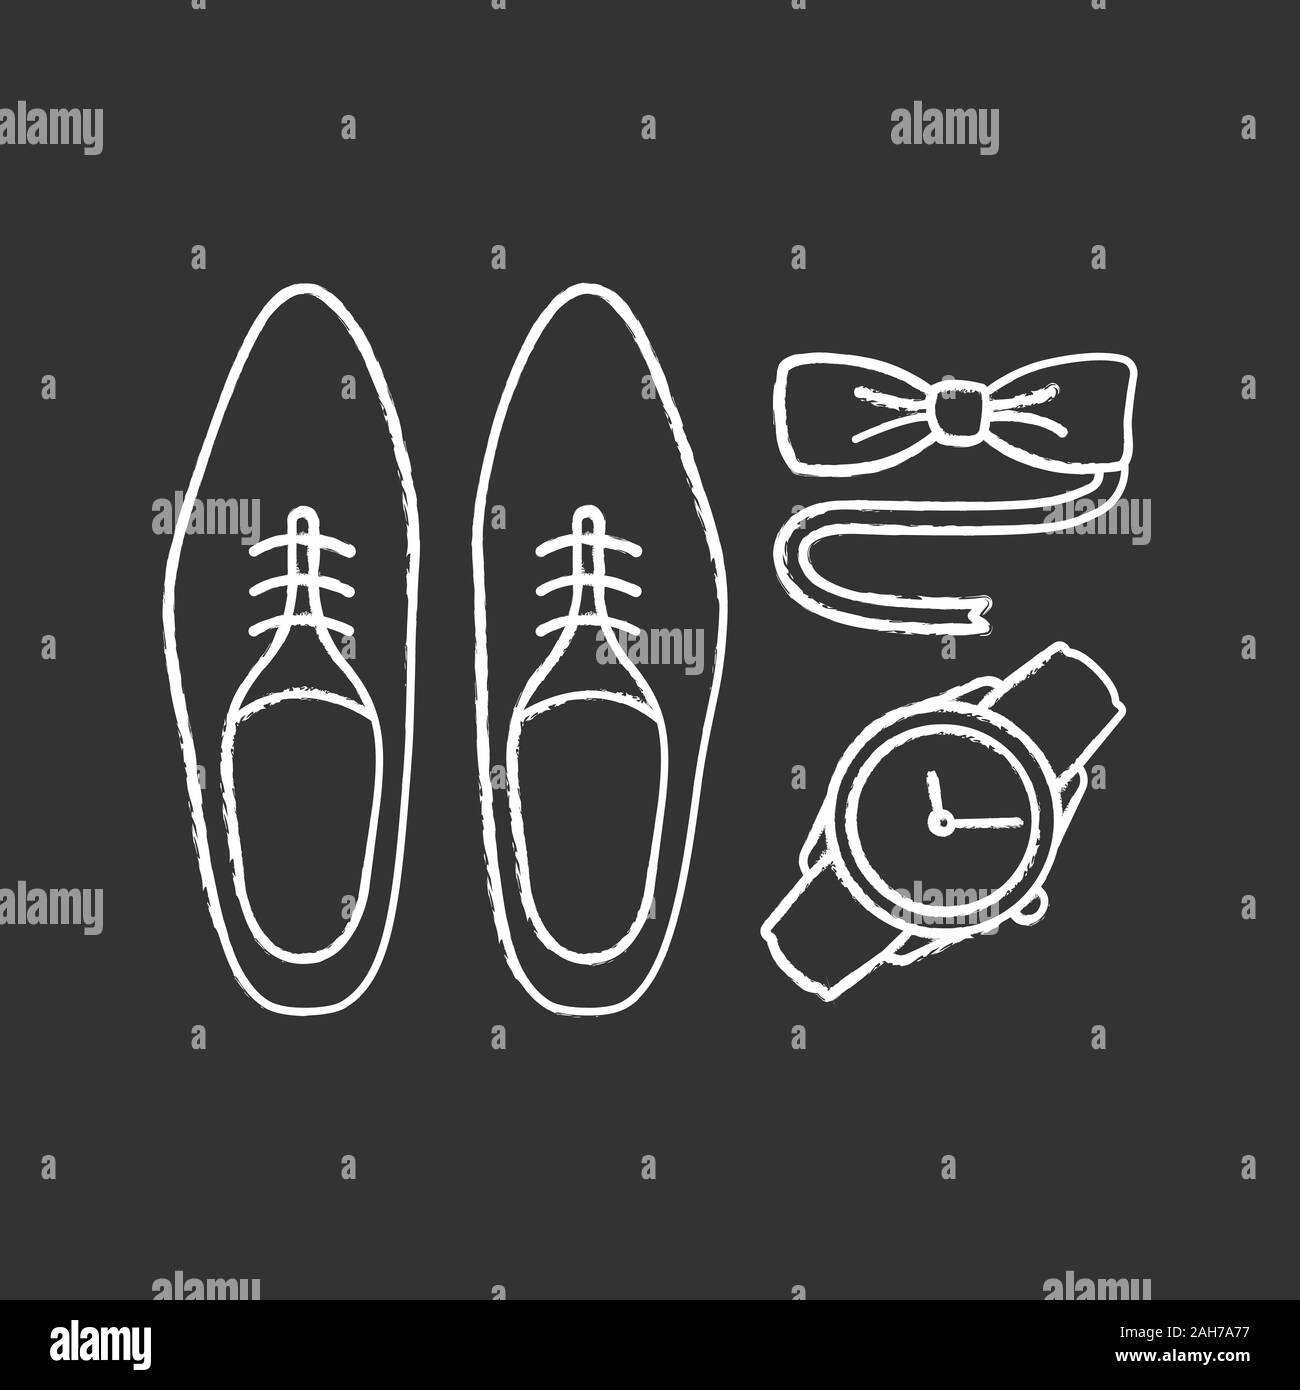 Mens accessories chalk icon. Dress code. Menswear. Men’s style and fashion. Shoes, wristwatch and tuxedo bow tie. Isolated vector chalkboard illustrat Stock Vector